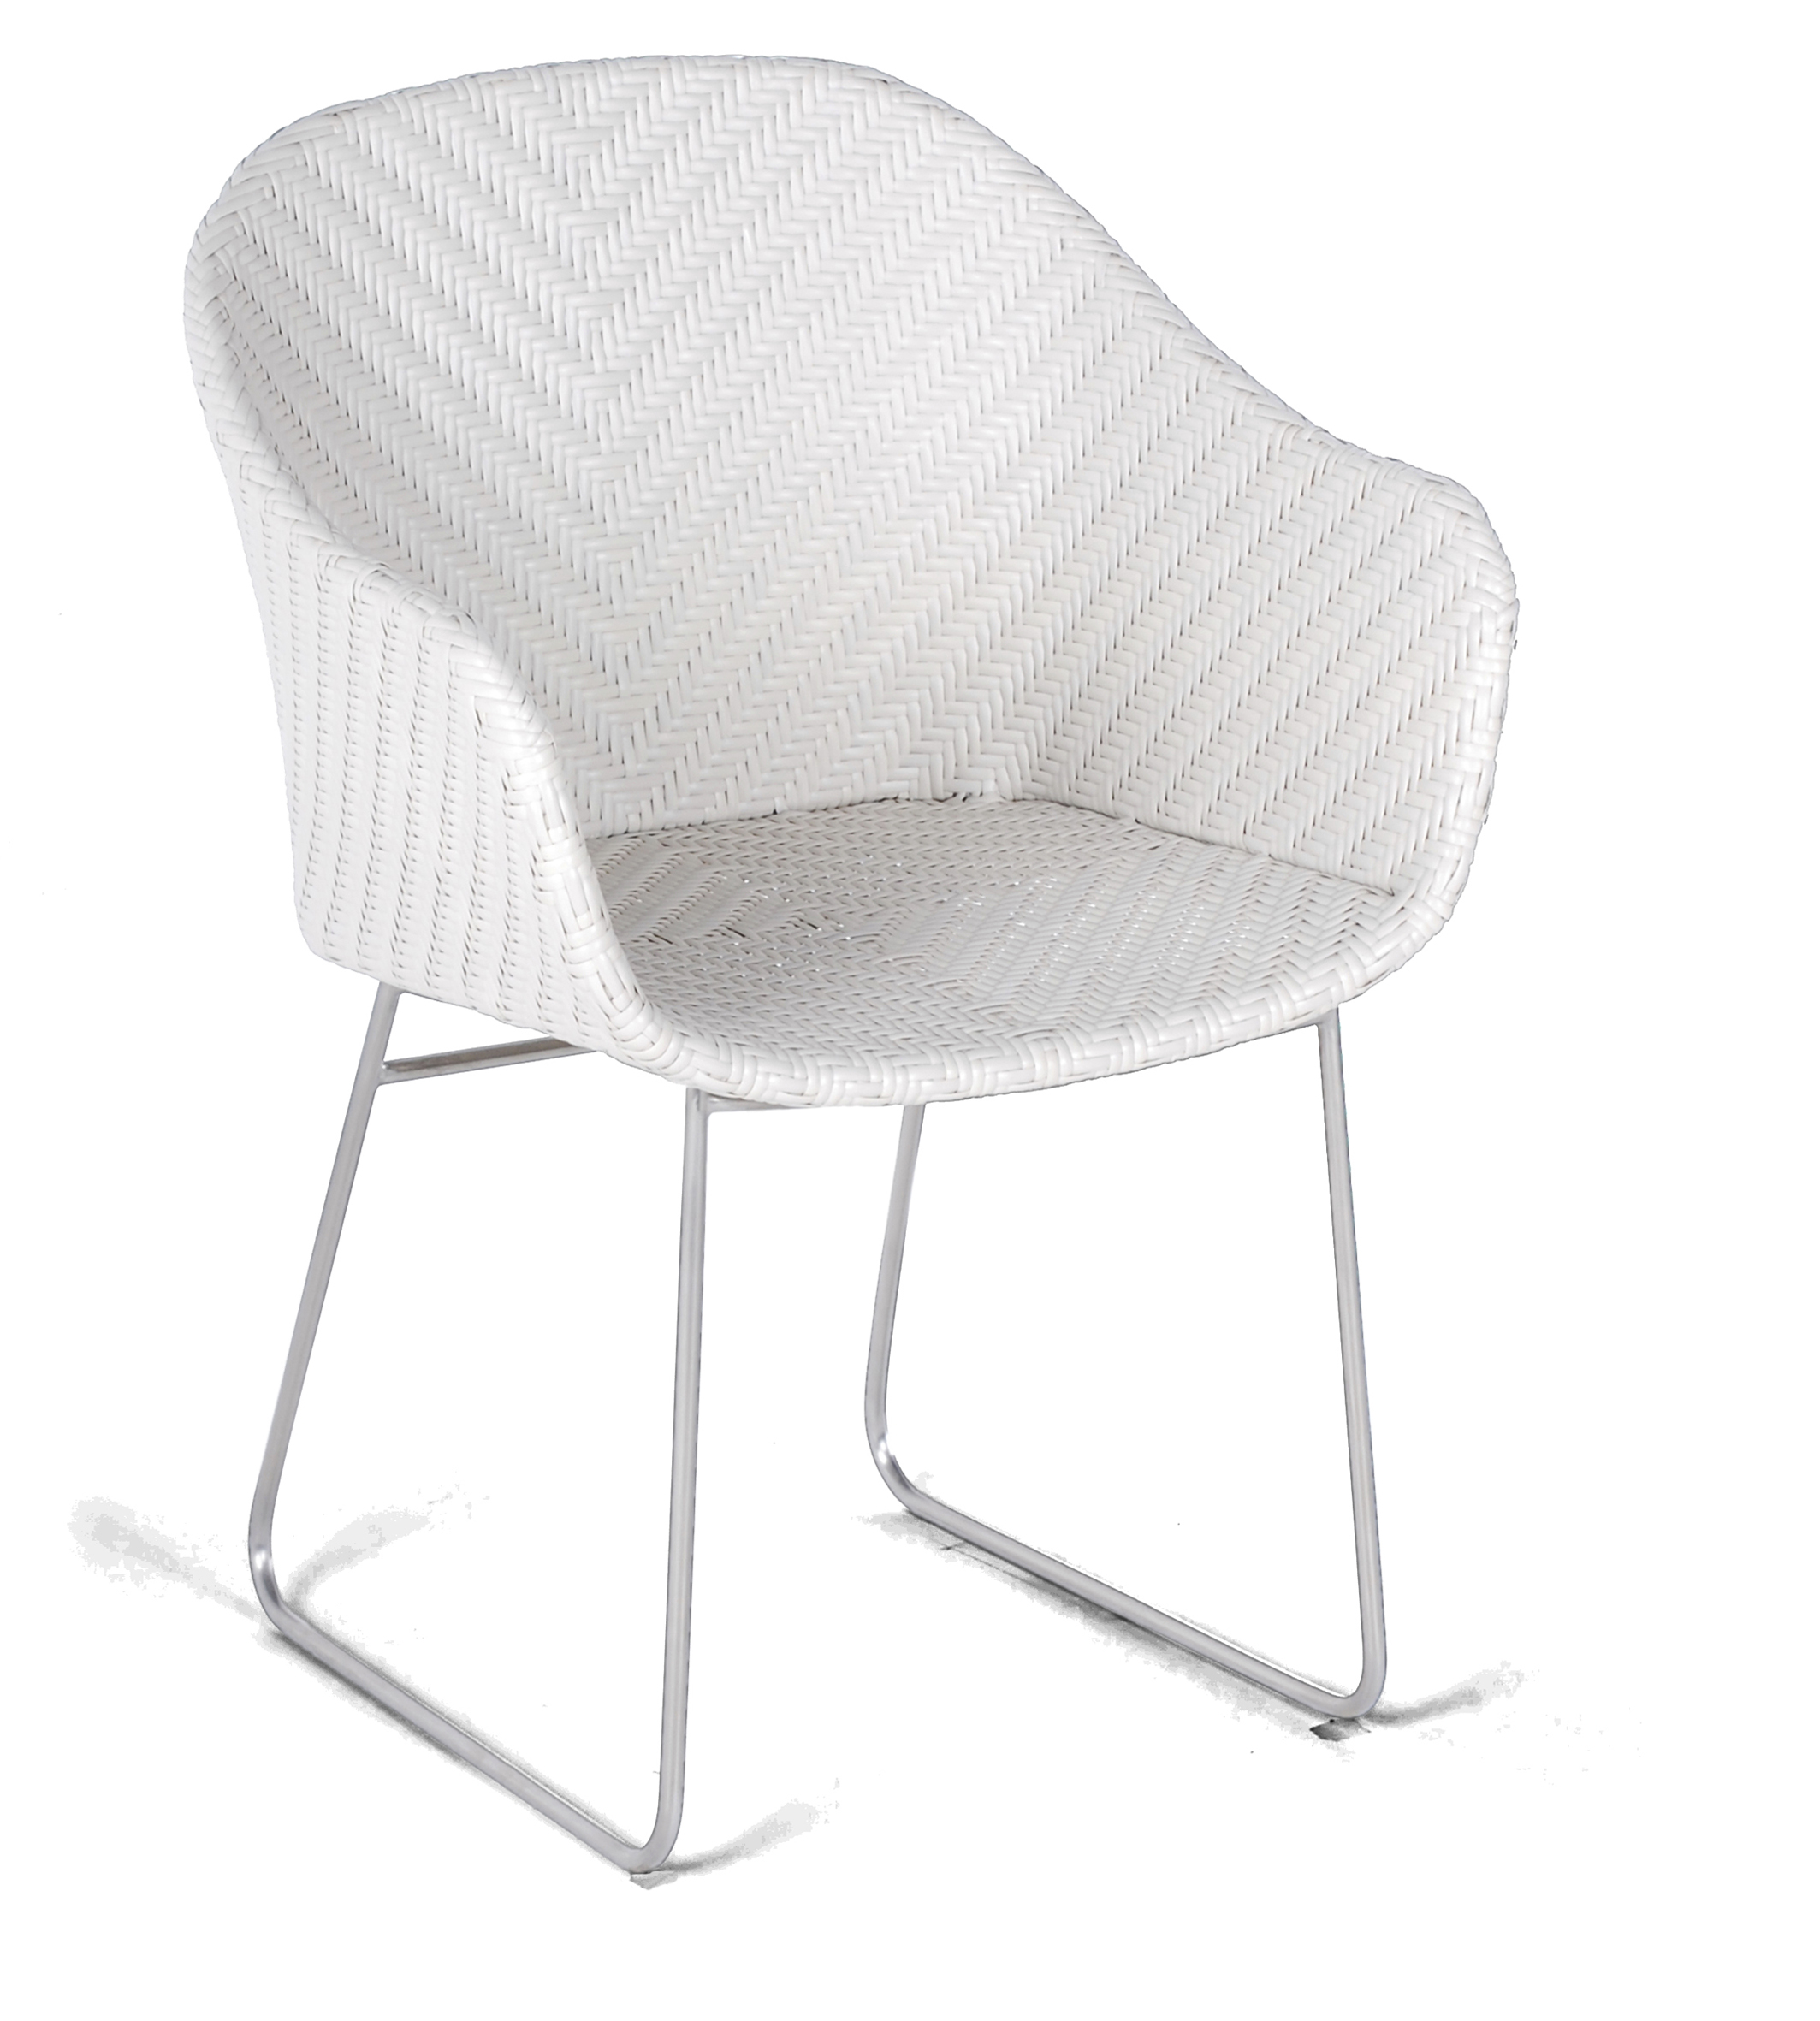 Modern Aluminum Rope Wicker Dining Chair Contract Hotels Restaurants